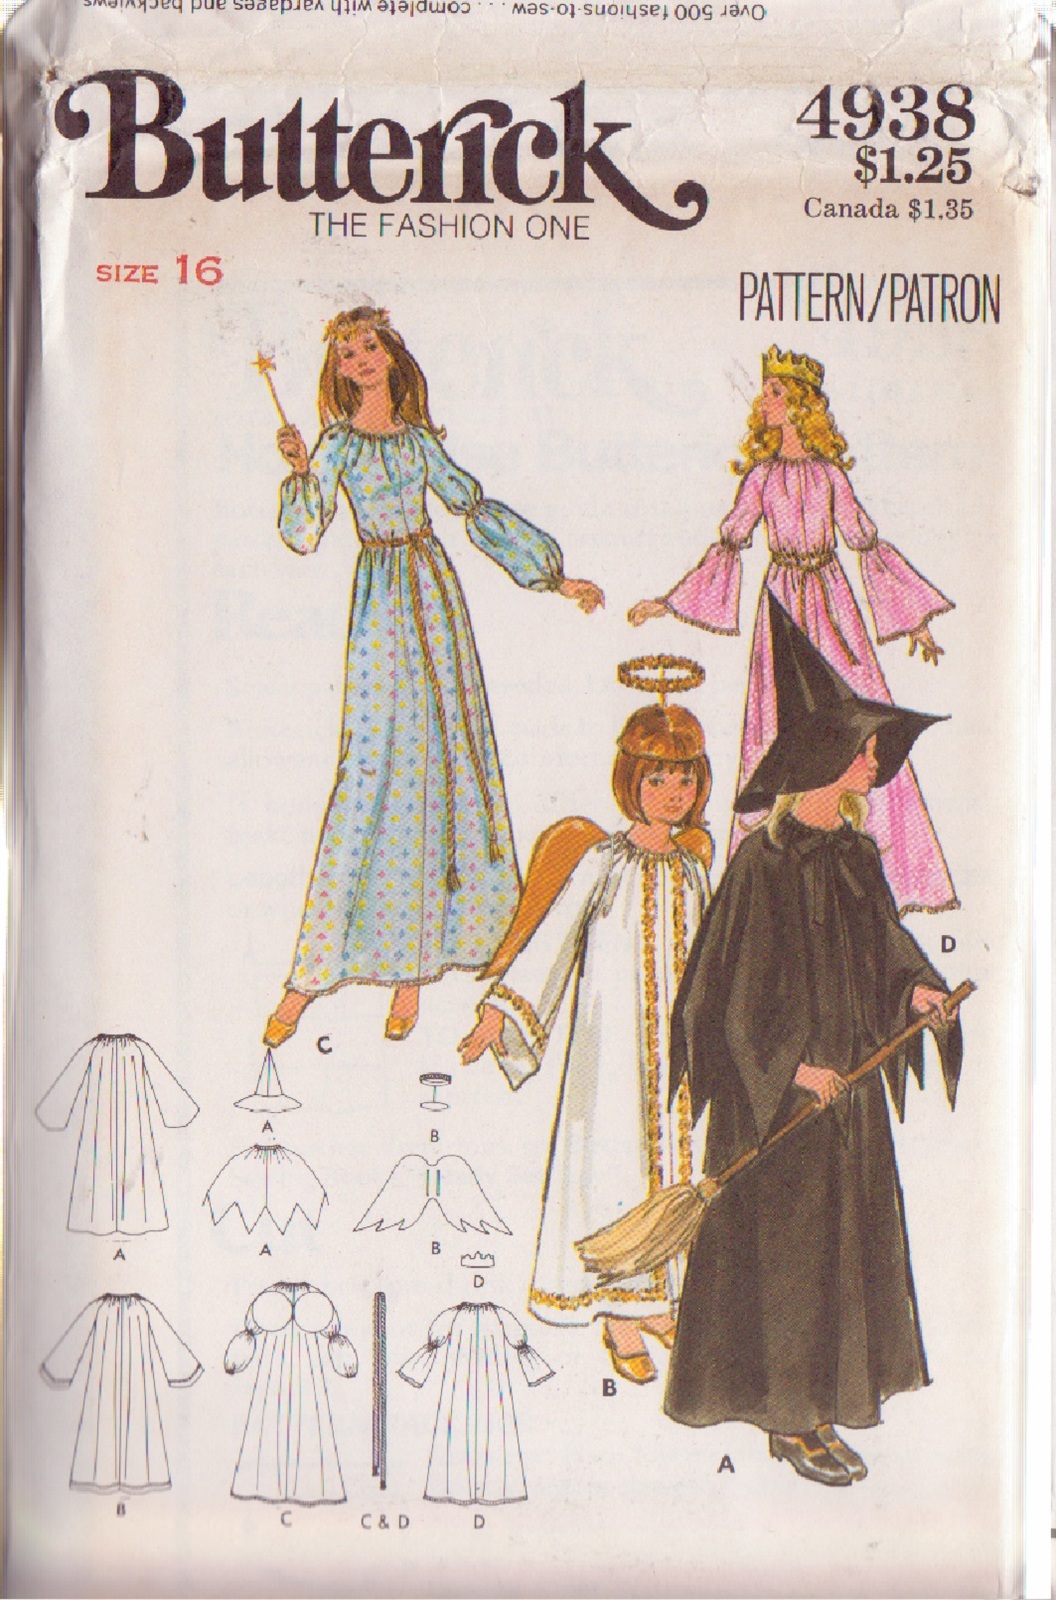 BUTTERICK PATTERN 4938 SZ 16 MISSES' ANGEL FAIRY WITCH PRINCESS COSTUMES UC - $5.00